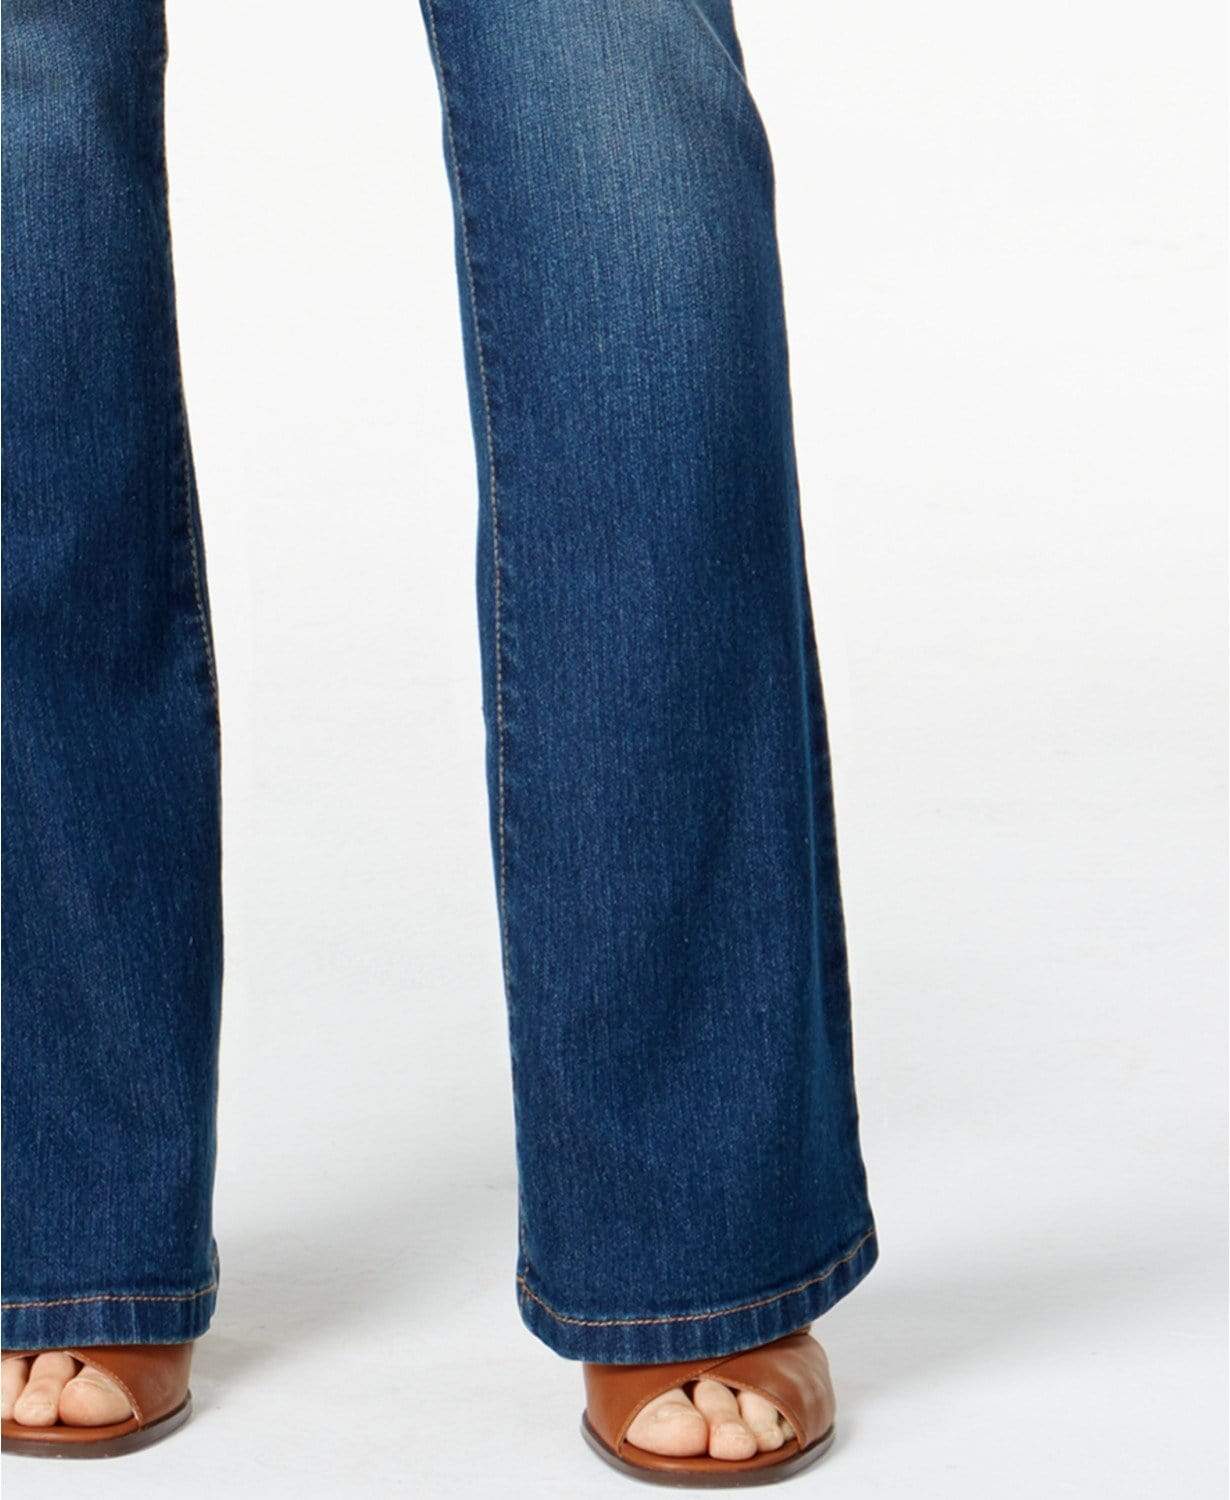 STYLE & CO Womens Bottoms STYLE & CO - Curvy-Fit Bootcut Jeans